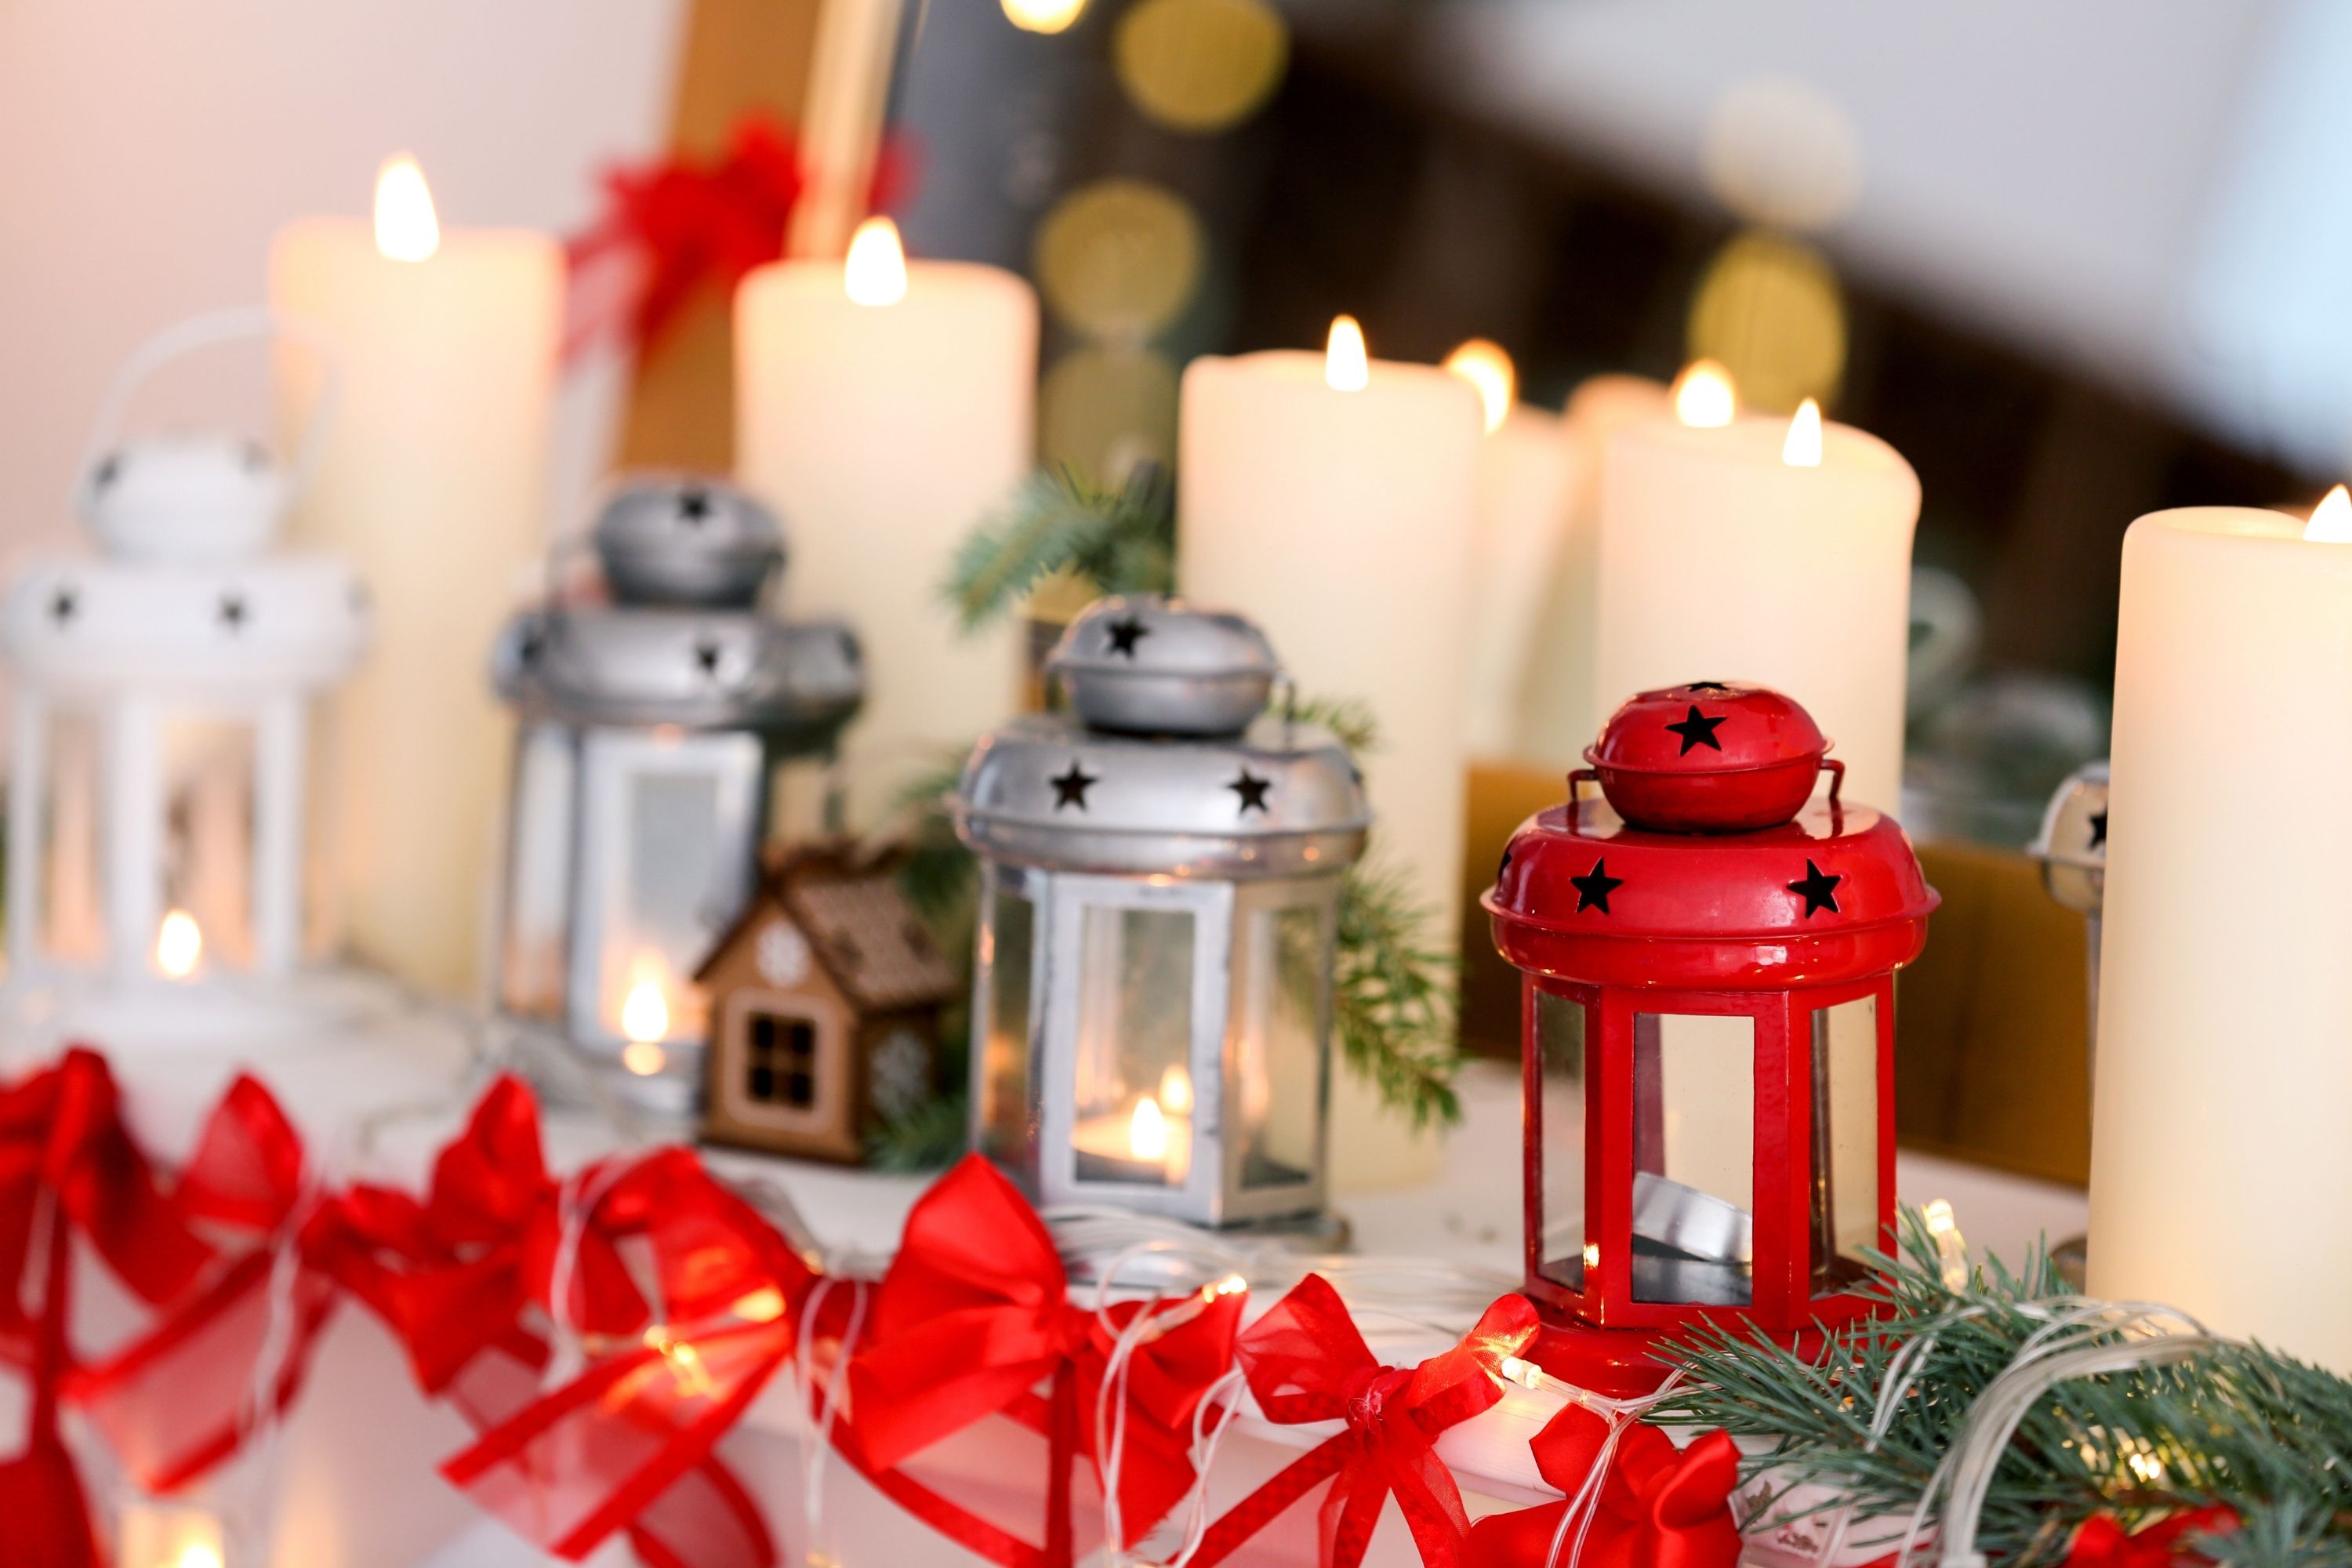 20 Genius Christmas Gifts Ideas to Surprise Your Family and Friends candles